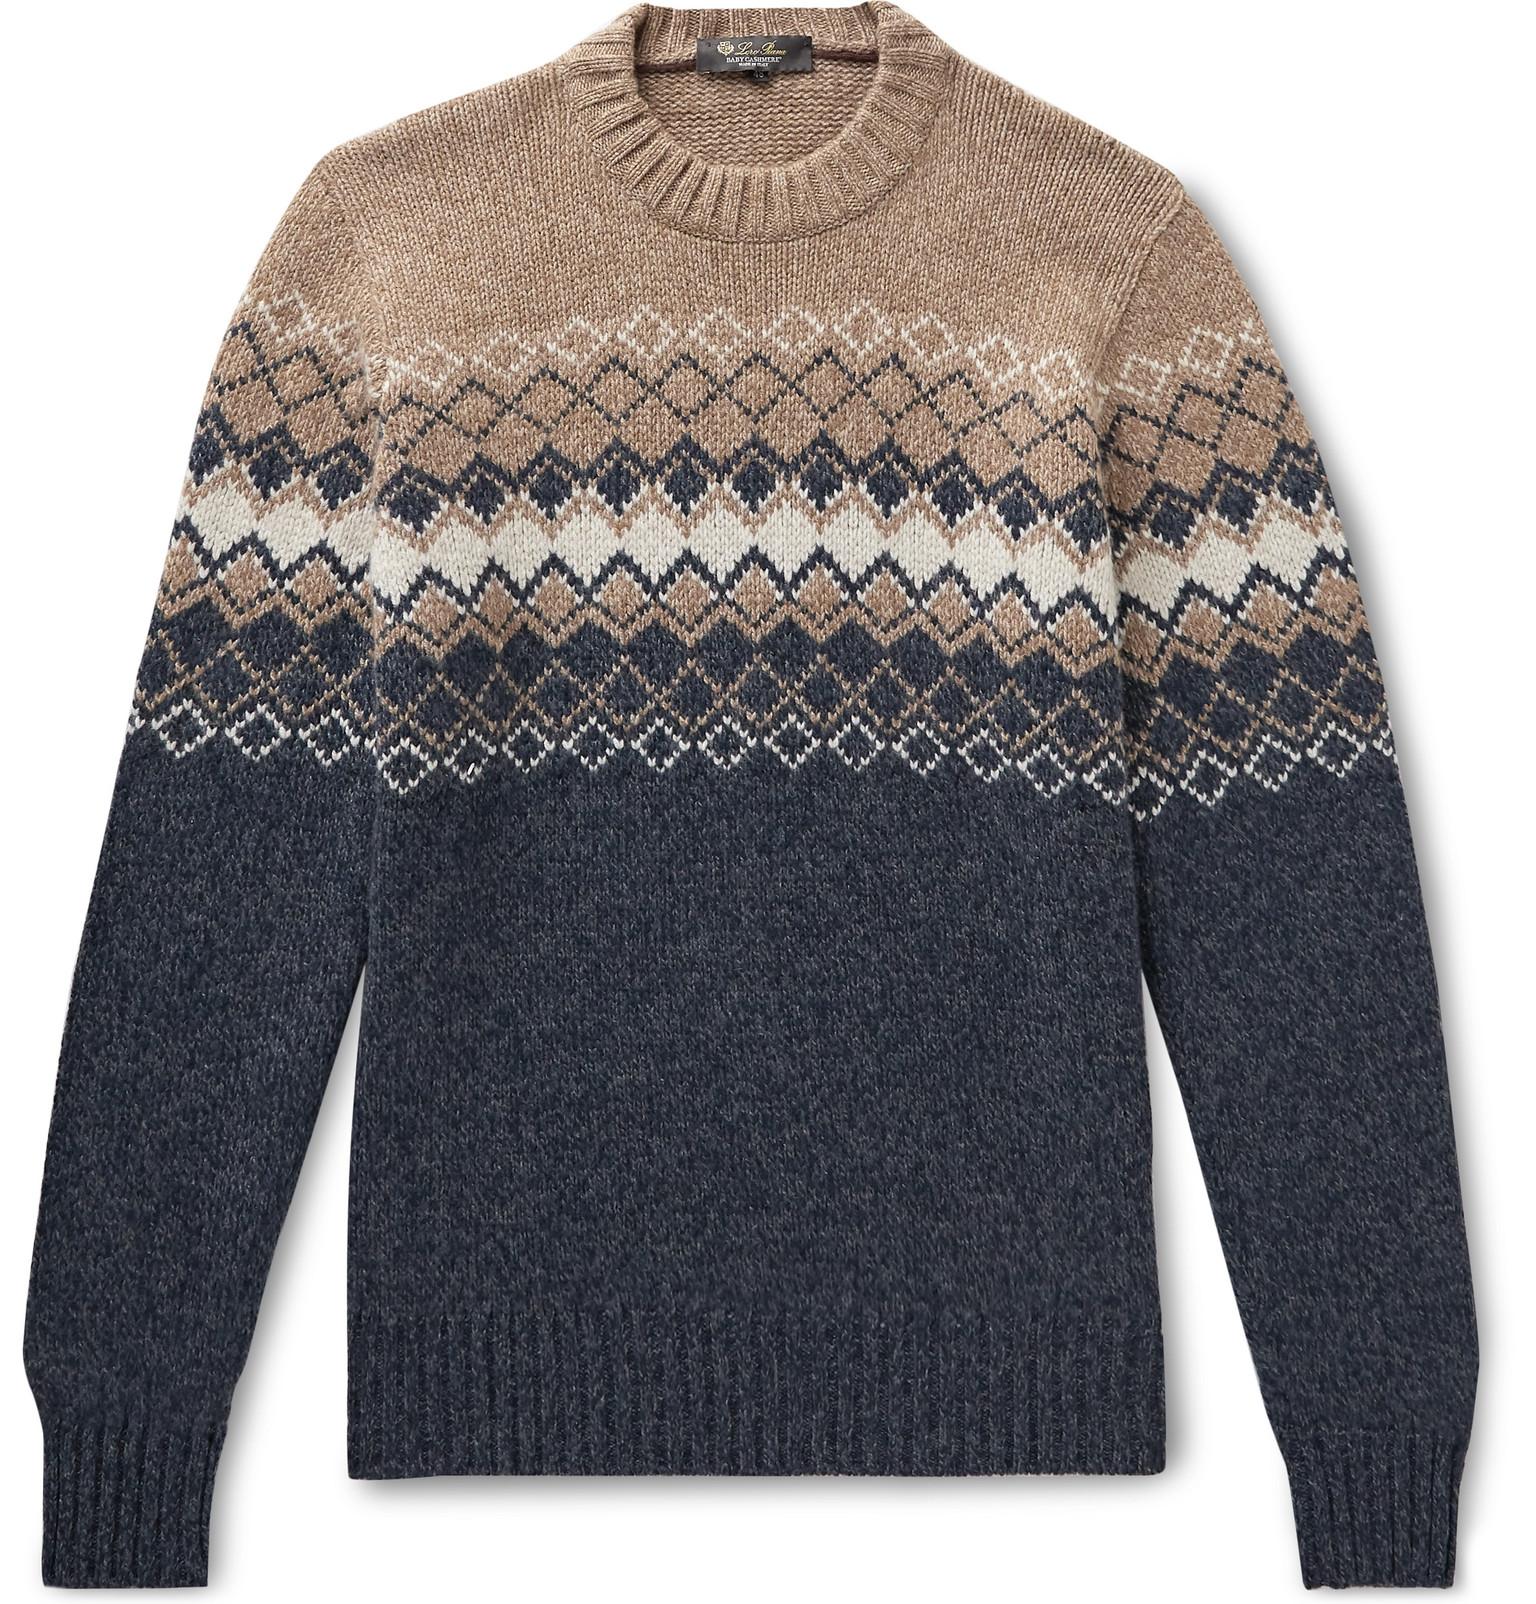 Loro Piana Fair Isle Baby Cashmere Sweater in Blue for Men - Lyst